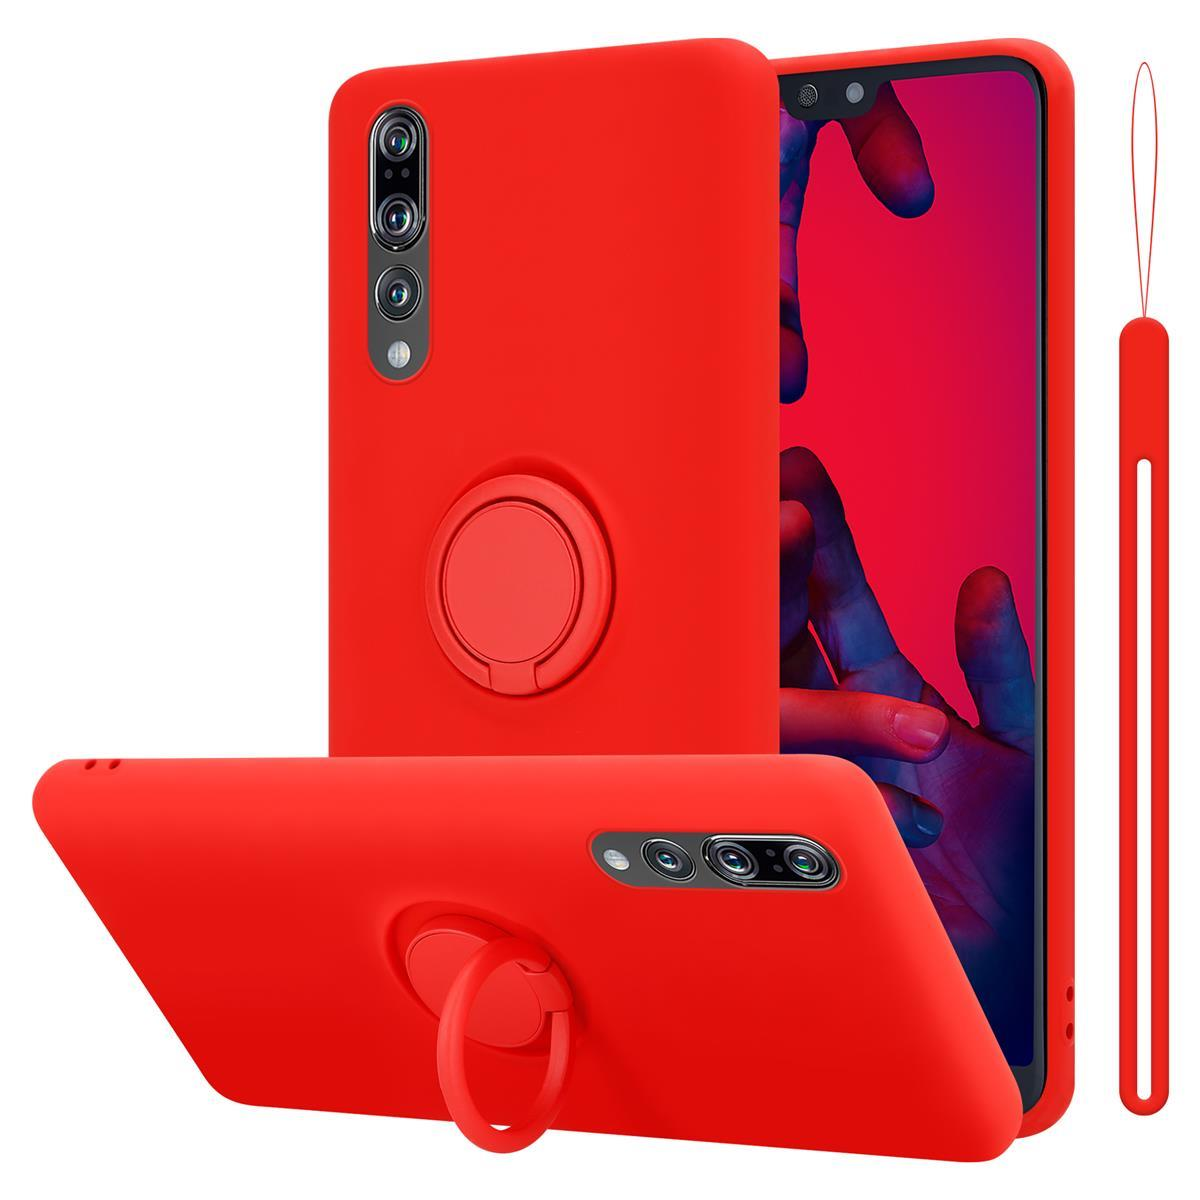 Backcover, Silicone P20 P20 / Ring PRO Hülle im Style, CADORABO Liquid LIQUID PLUS, ROT Huawei, Case